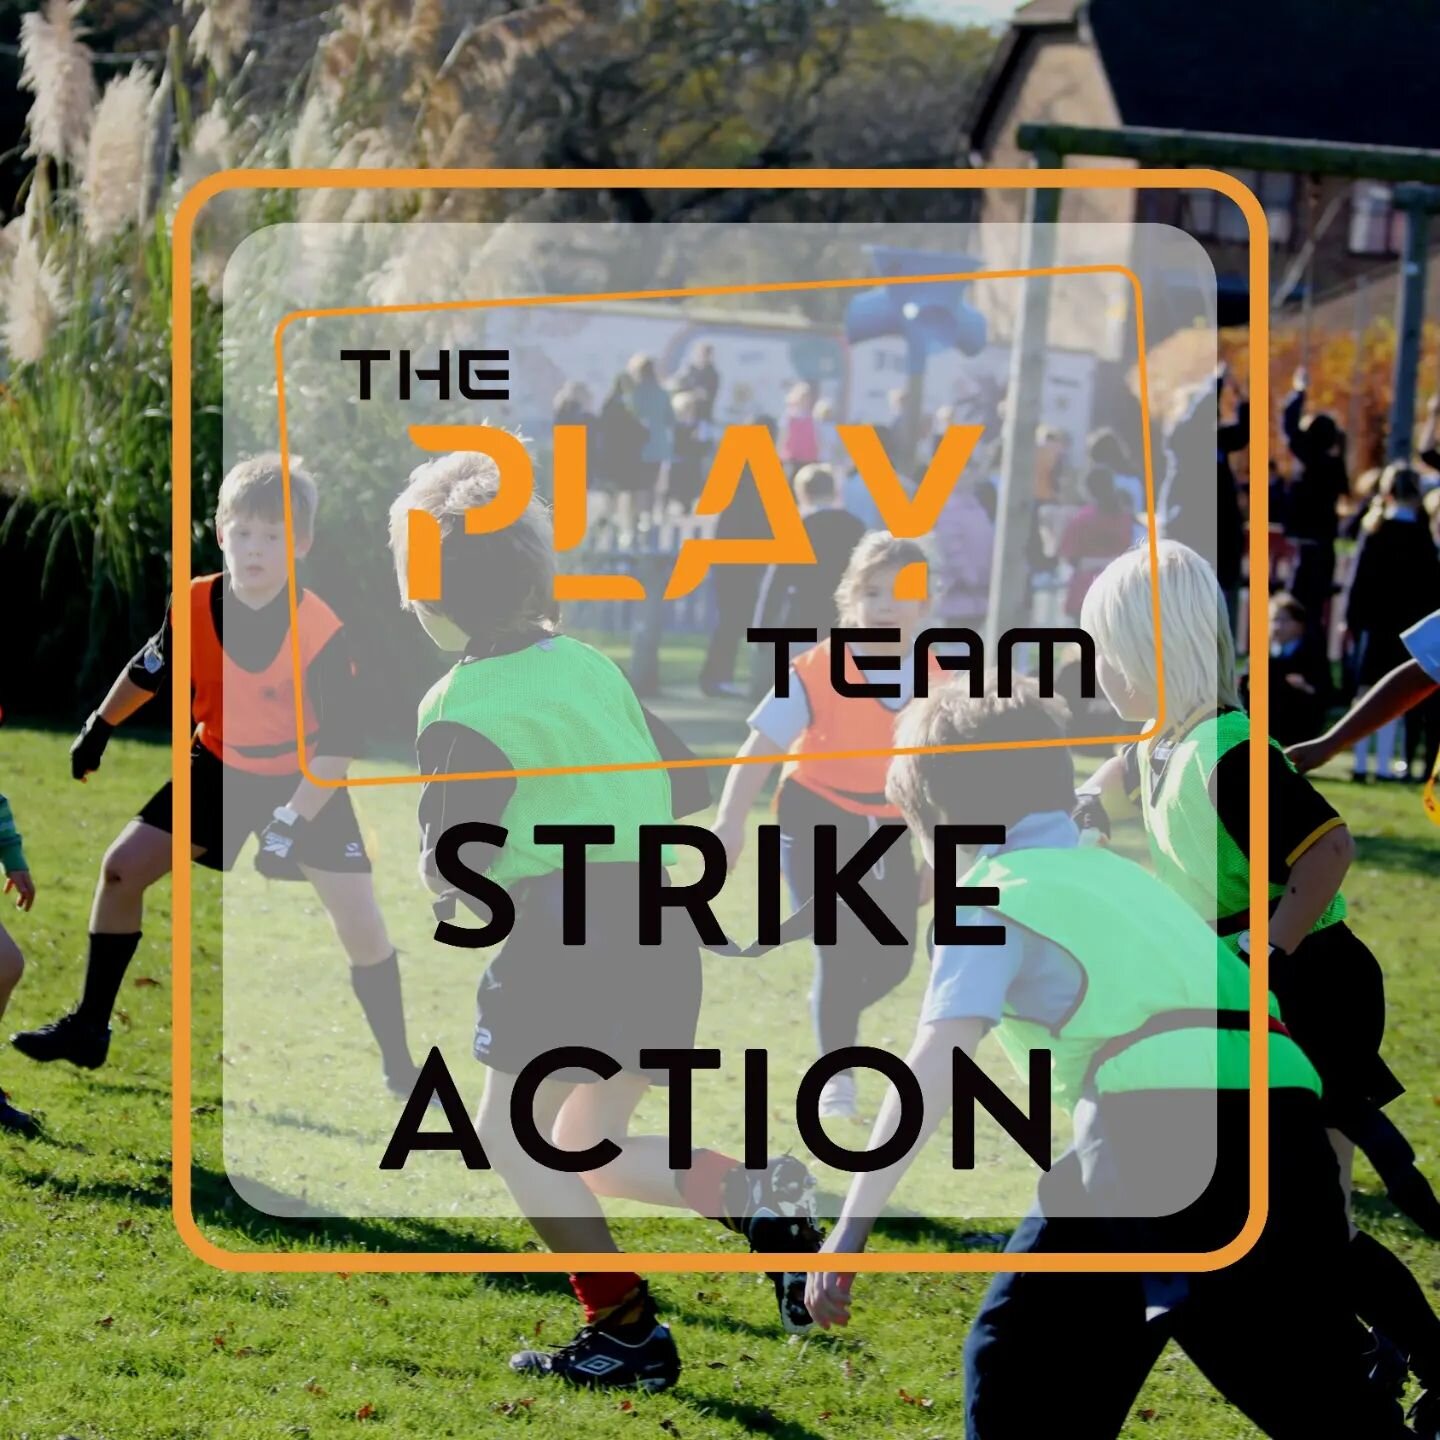 With the recent announcement of proposed strike action on Thursday 2nd March 2023, we wanted to confirm the plans for our after-school clubs to allow all parents/guardians an opportunity to make suitable arrangements.

Despite the strikes, our clubs